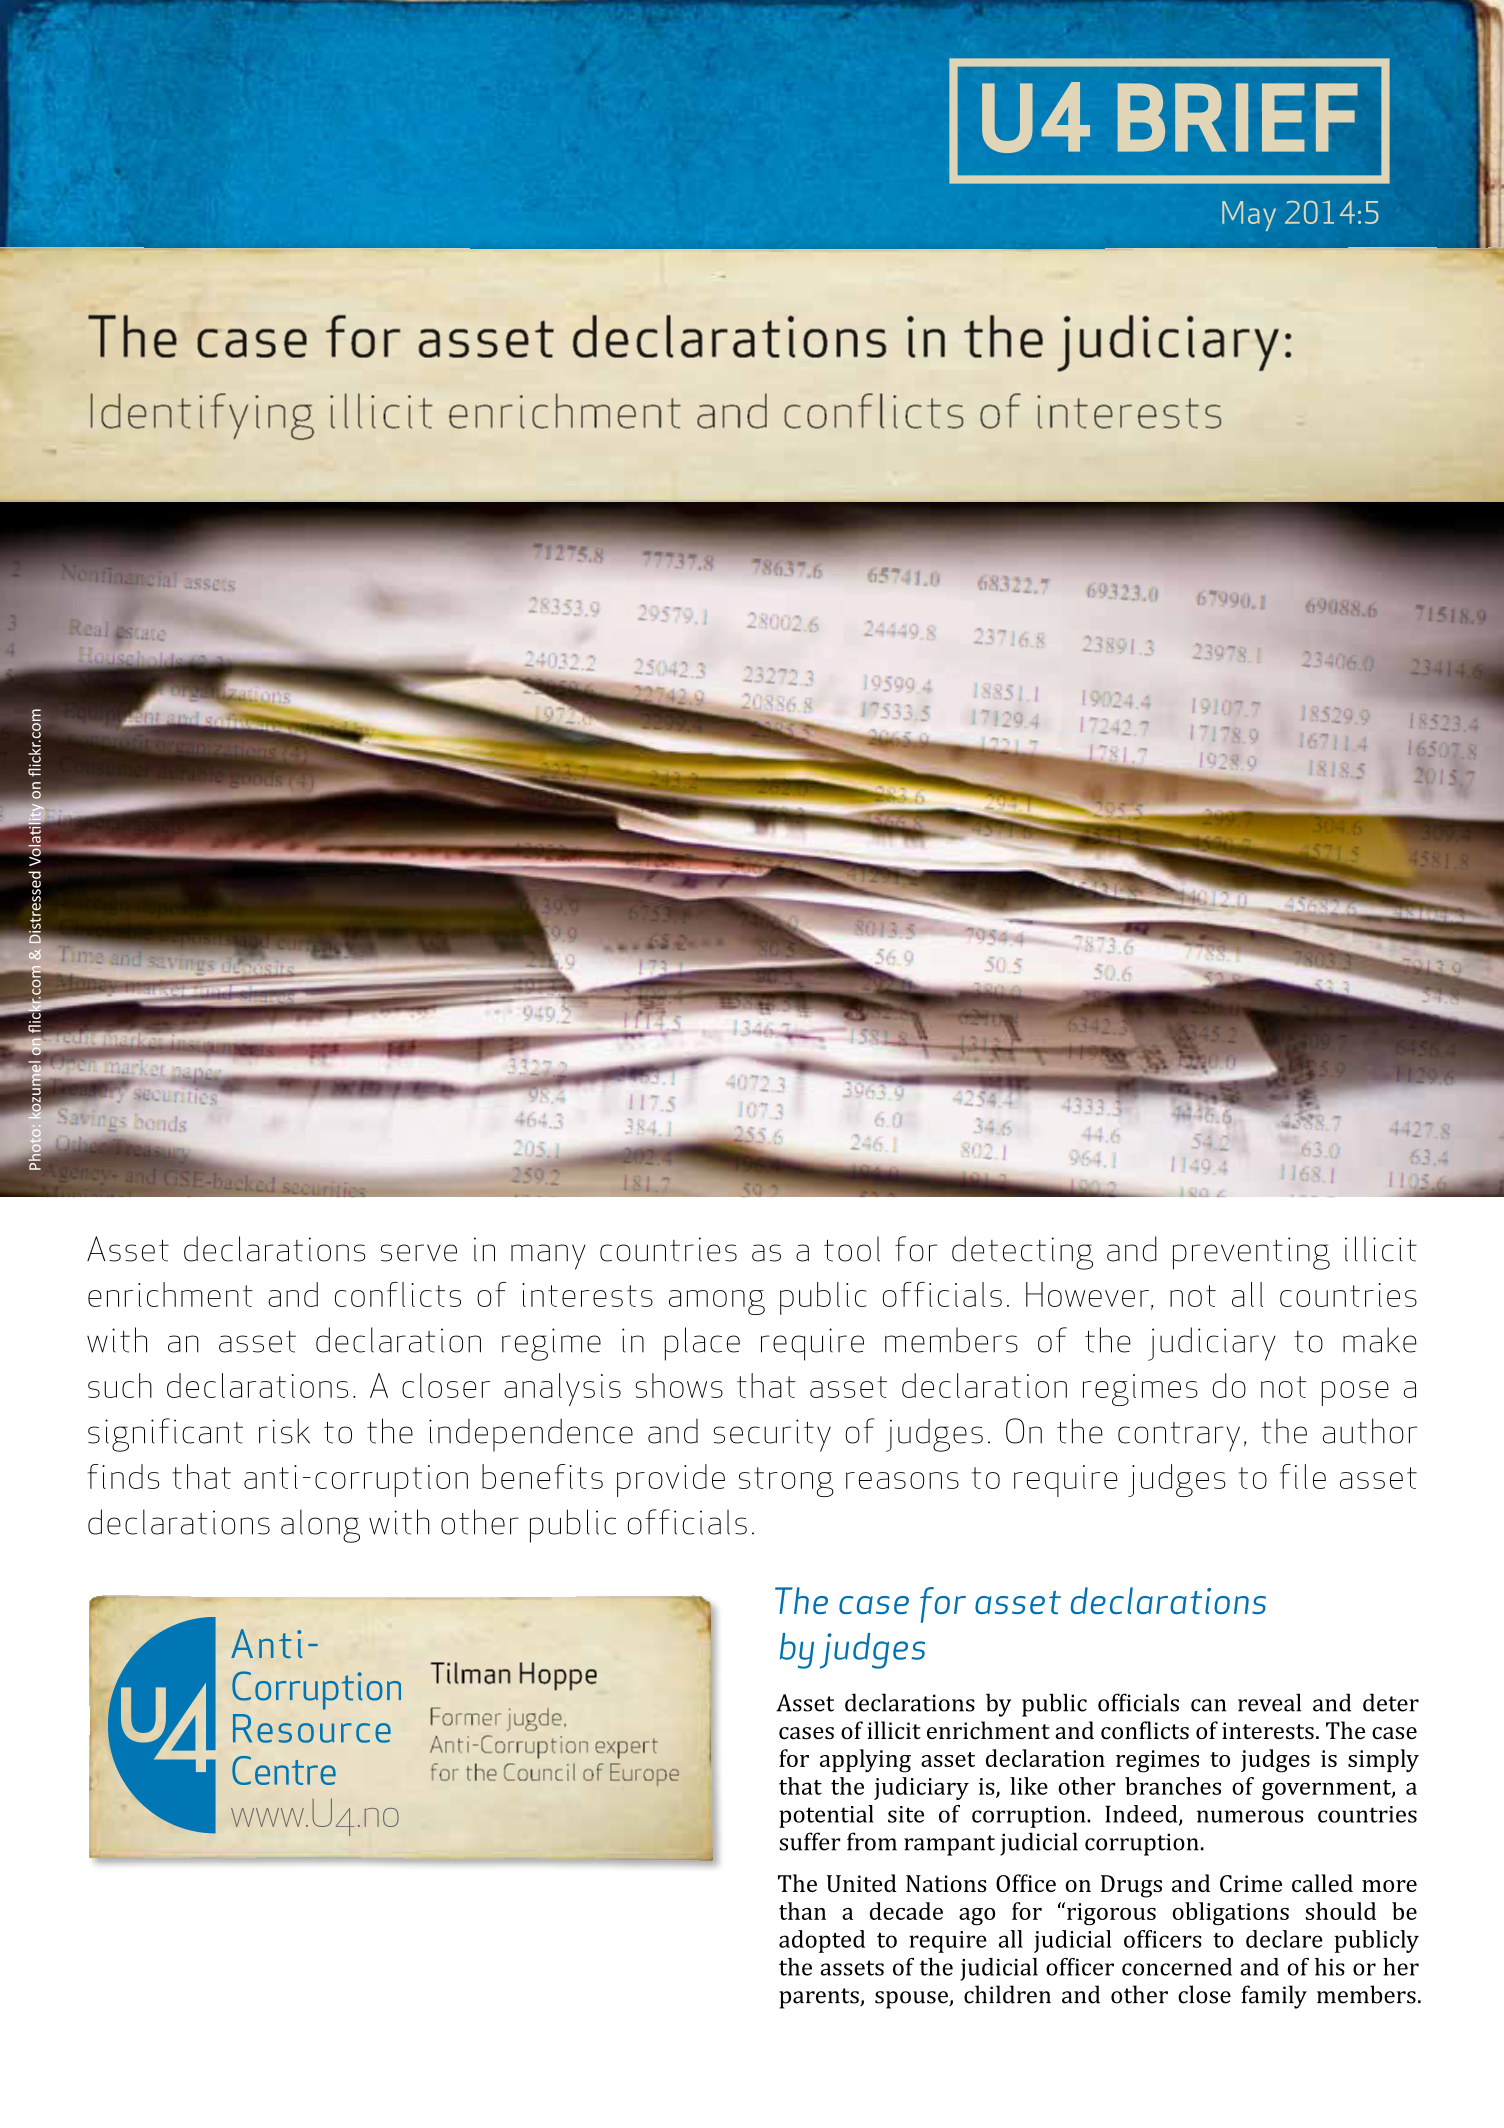 The case for asset declarations in the judiciary: Identifying illicit enrichment and conflicts of interests